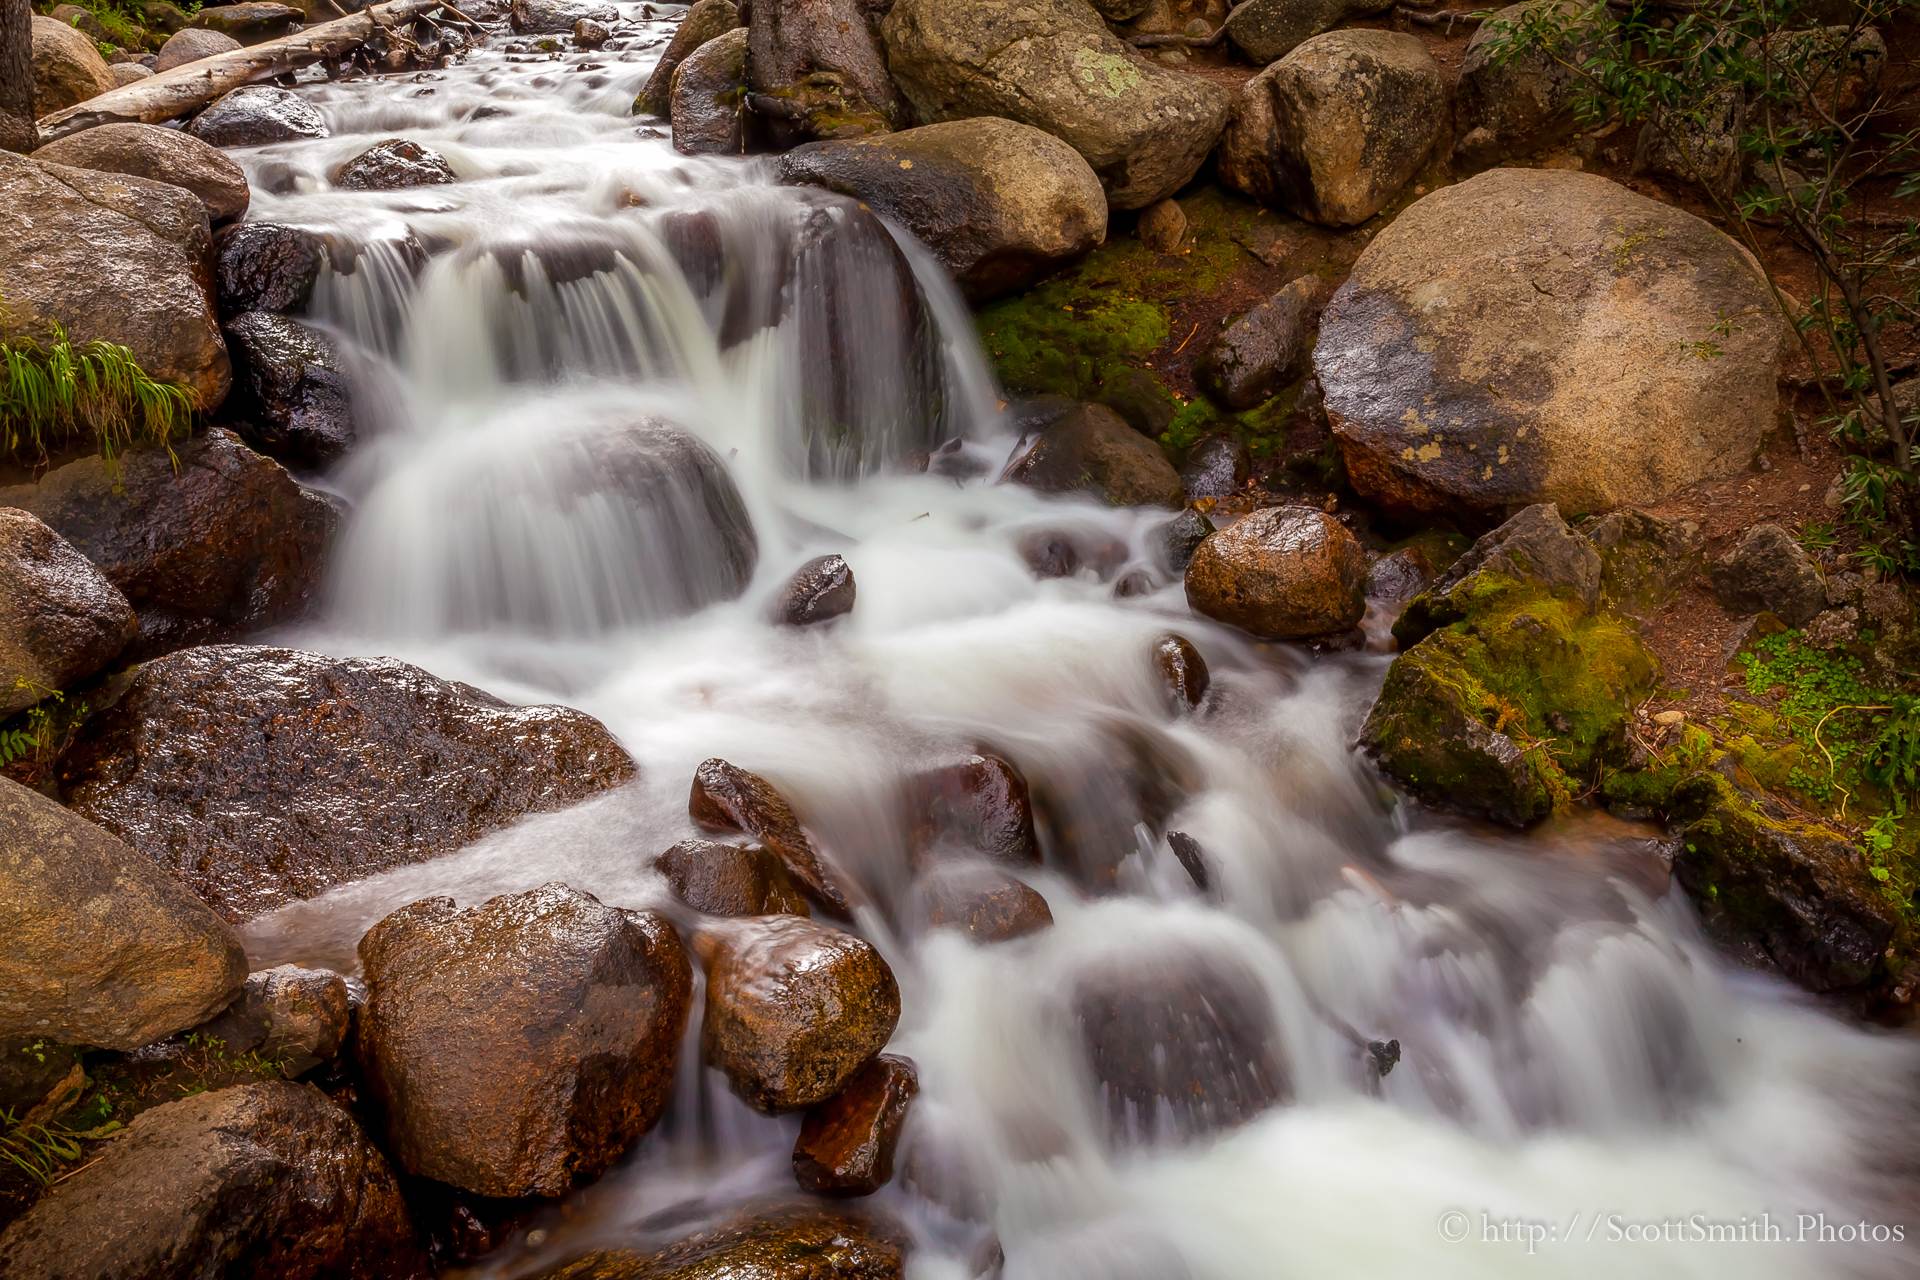 Mt Evans Waterfall - A small stream trickles down the side of the mountain. by Scott Smith Photos